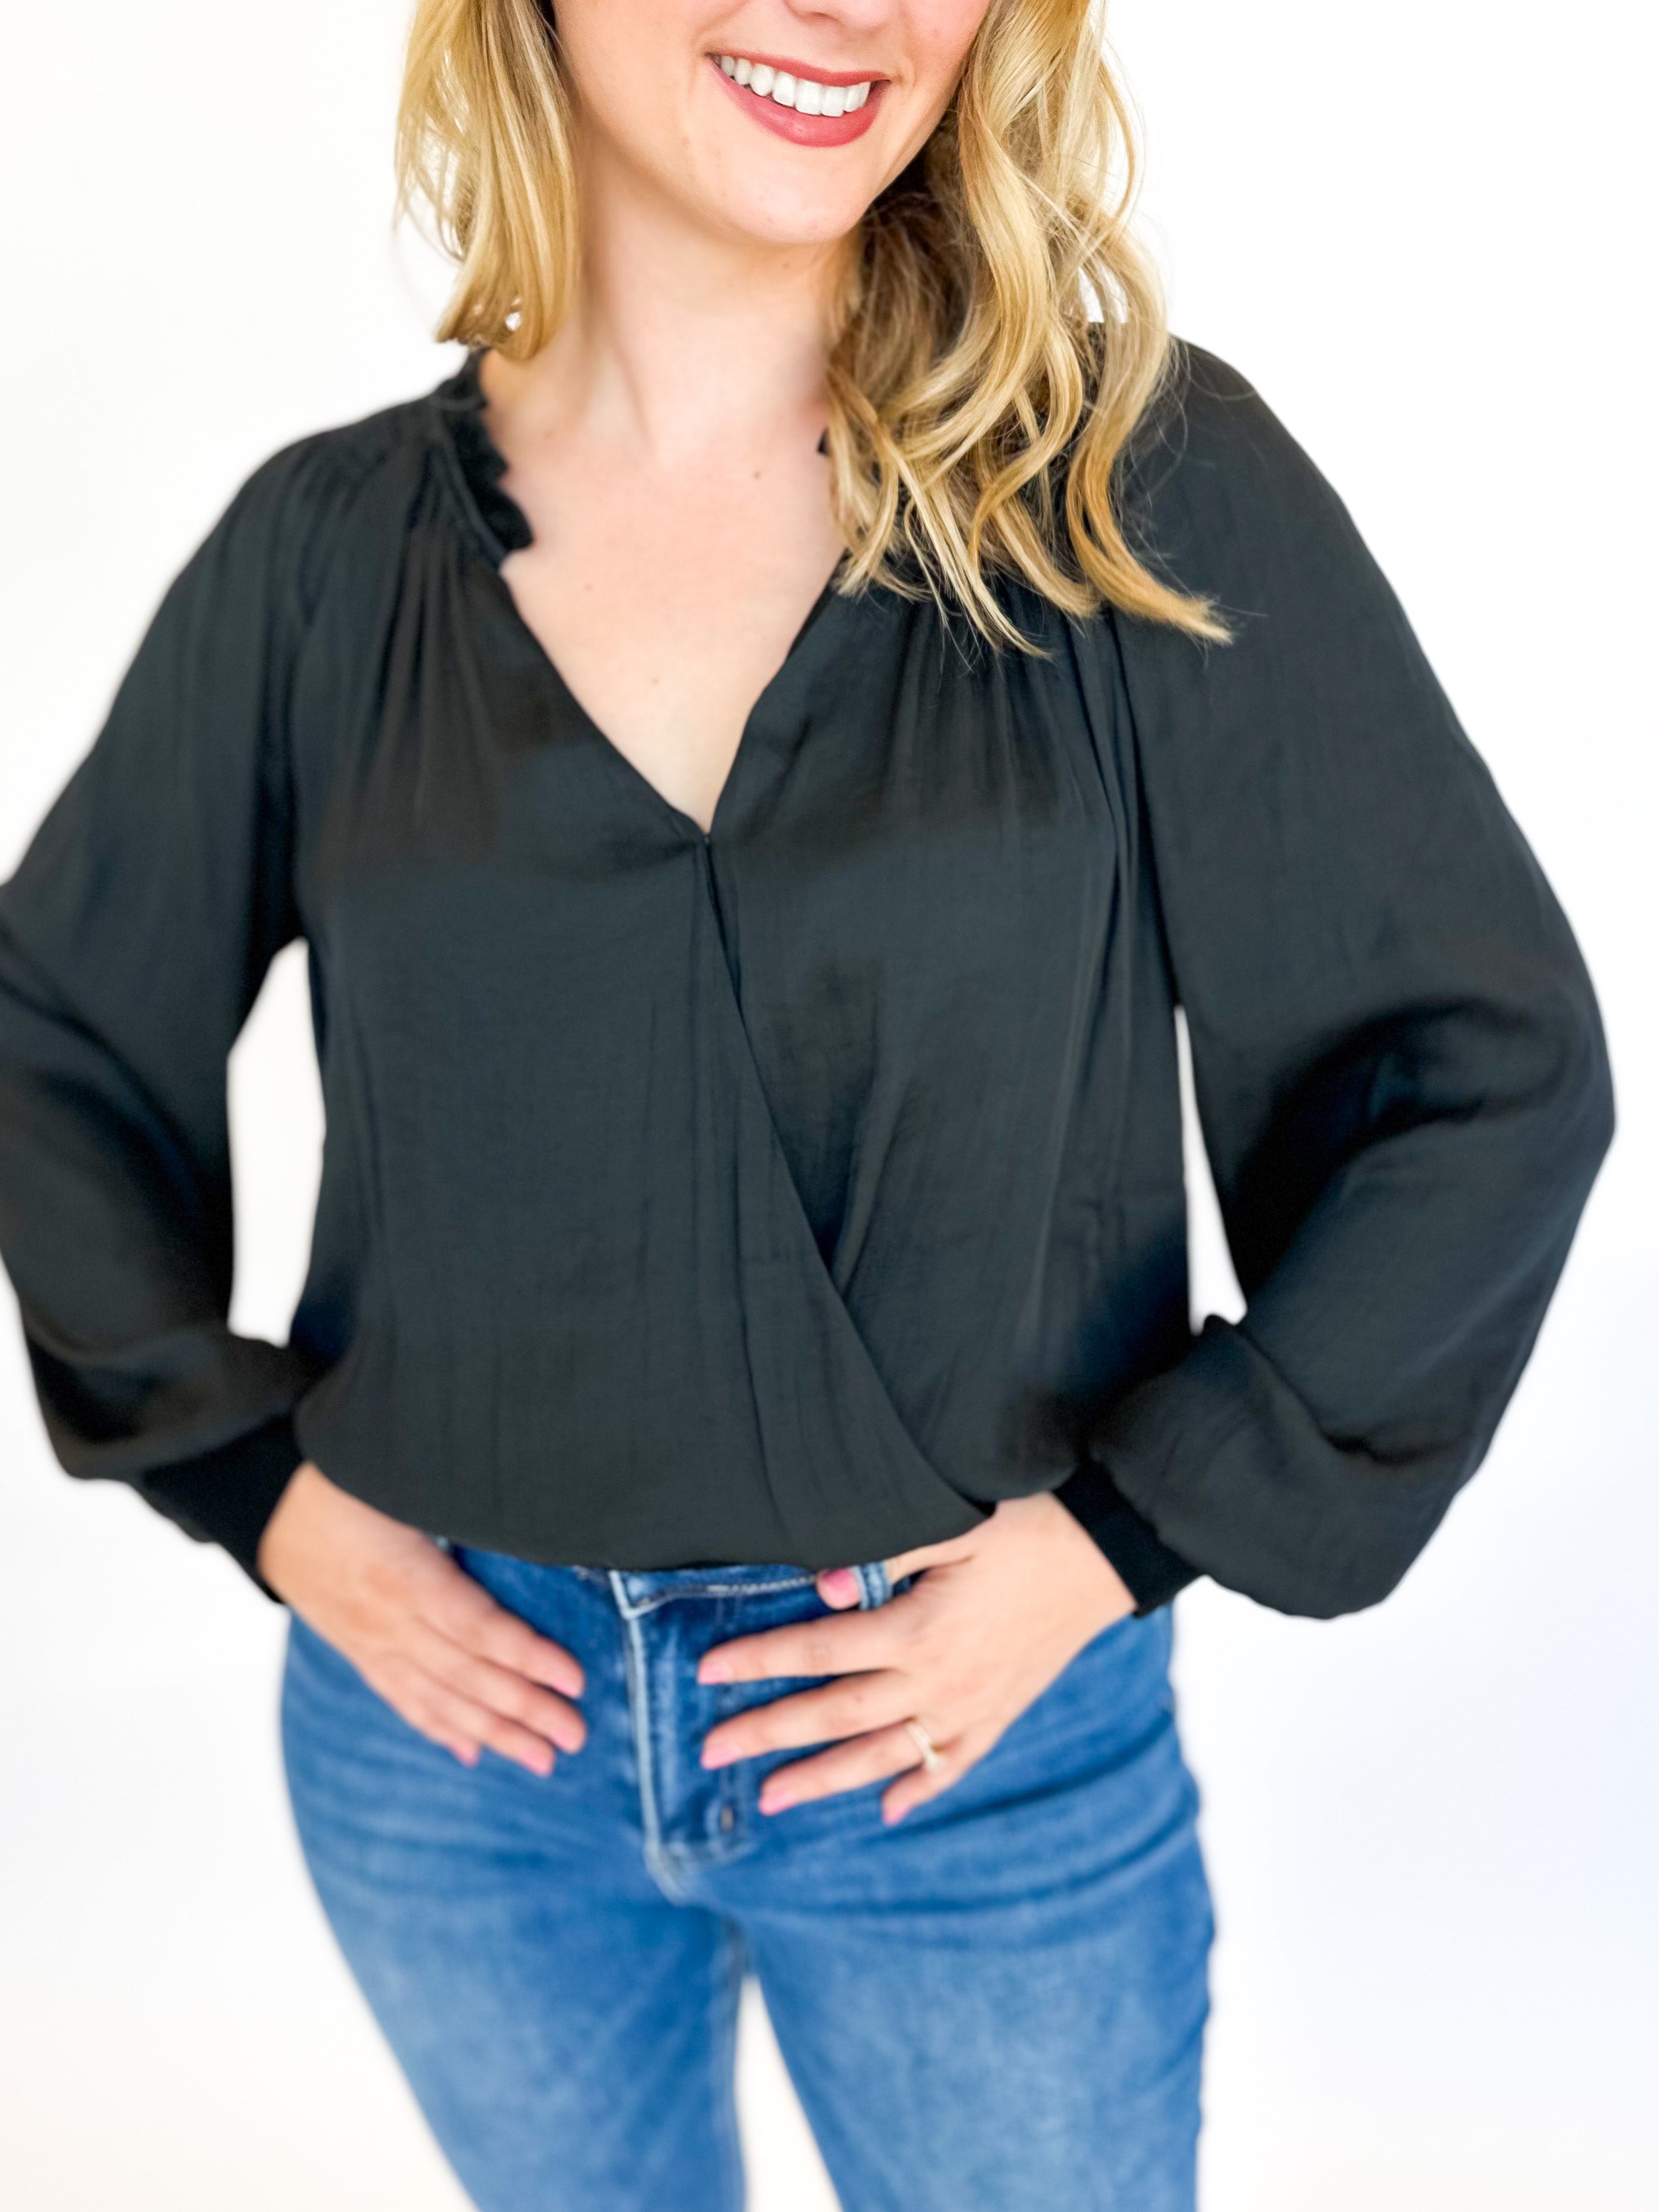 Classic Satin Blouse - Black-200 Fashion Blouses-CURRENT AIR CLOTHING-July & June Women's Fashion Boutique Located in San Antonio, Texas